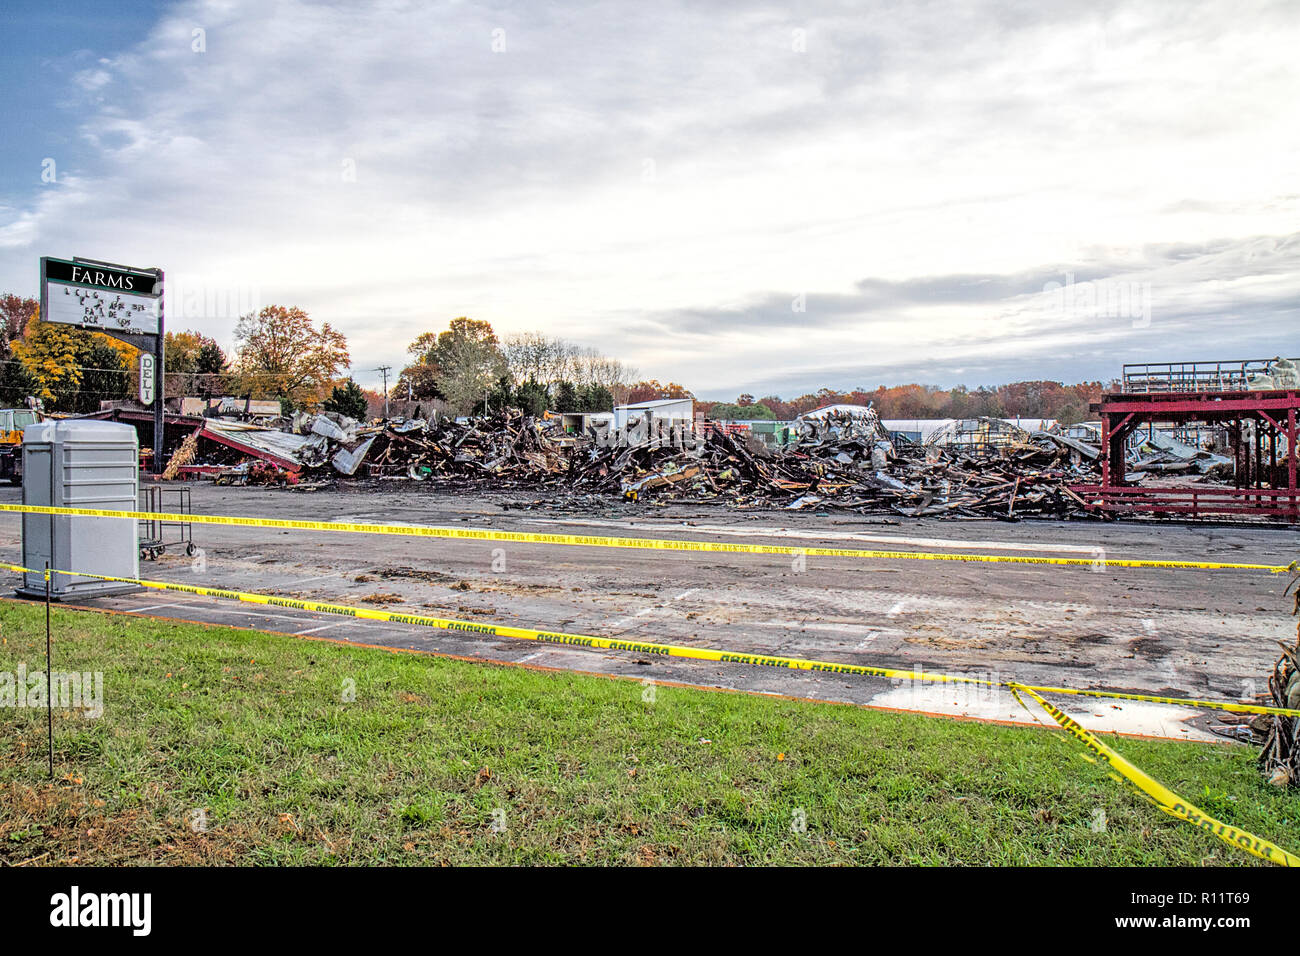 Local and popular large country farmer's market, Wiley Farms, burns to the ground after 40 plus years in business. Stock Photo